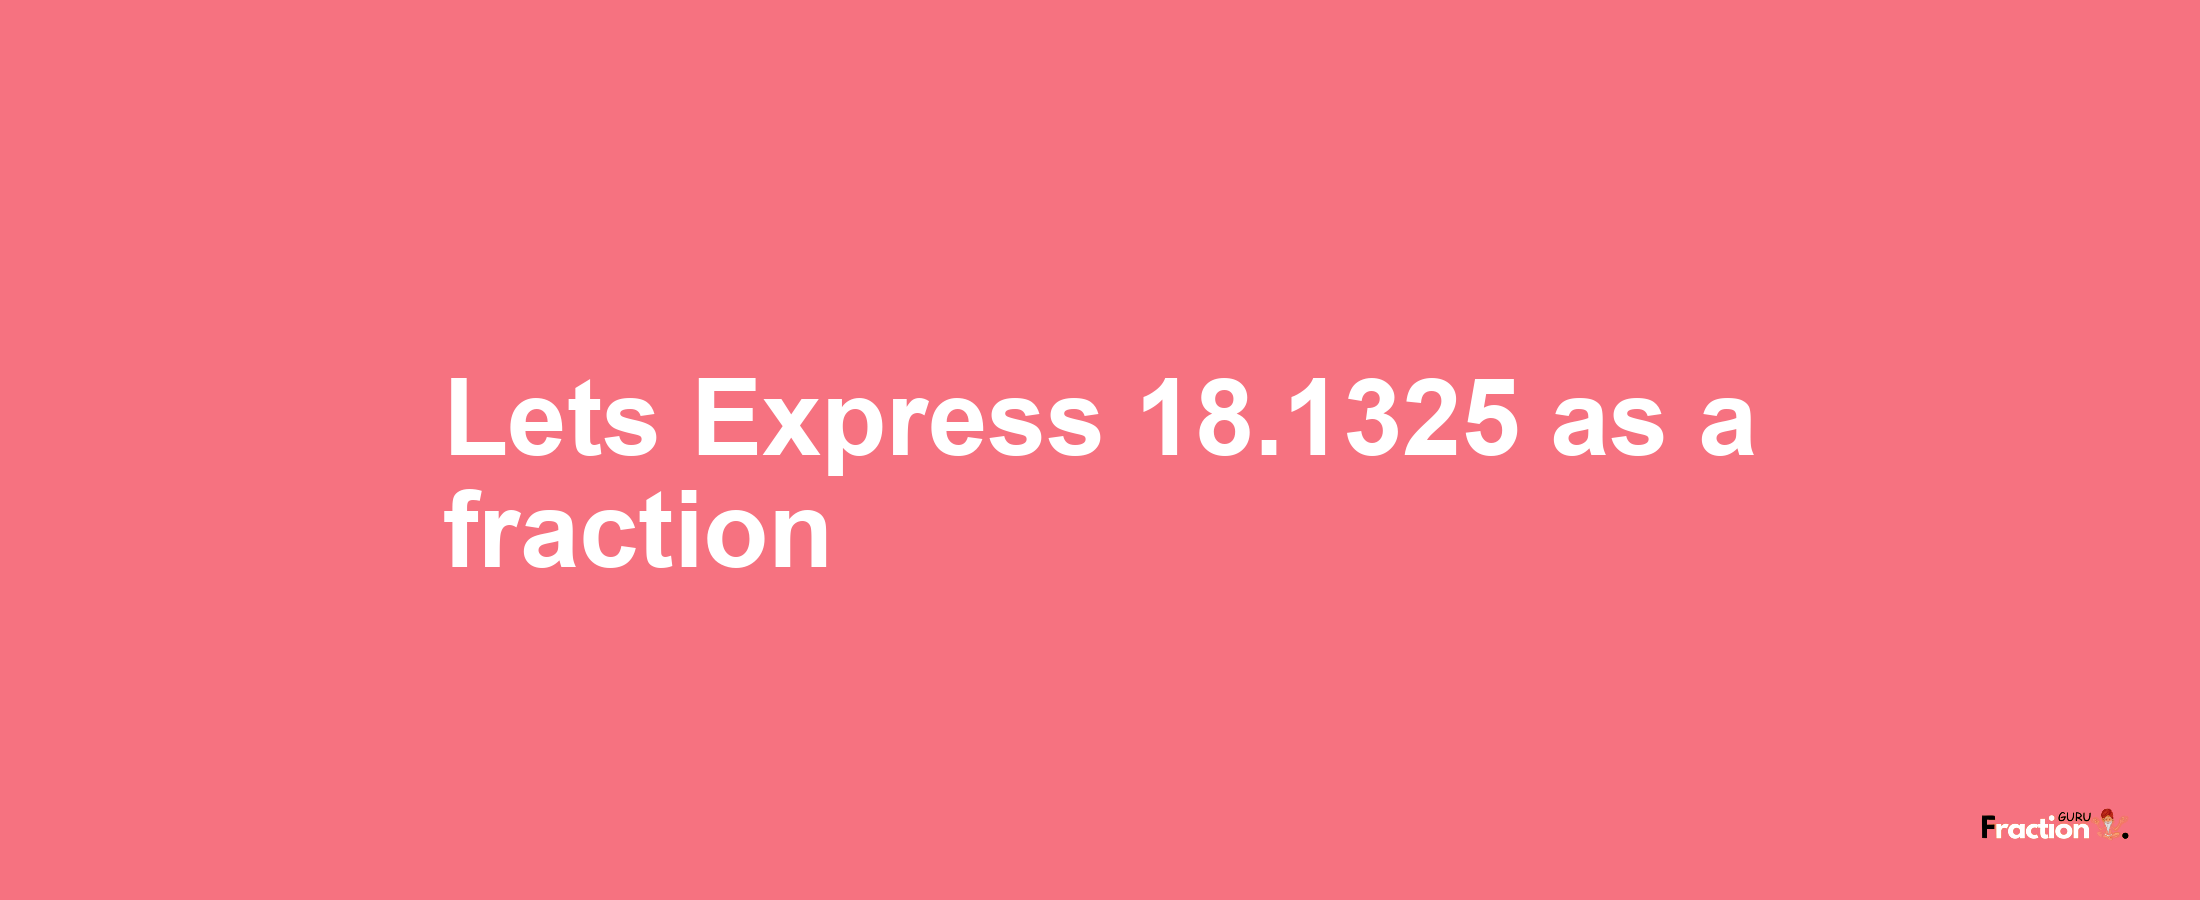 Lets Express 18.1325 as afraction